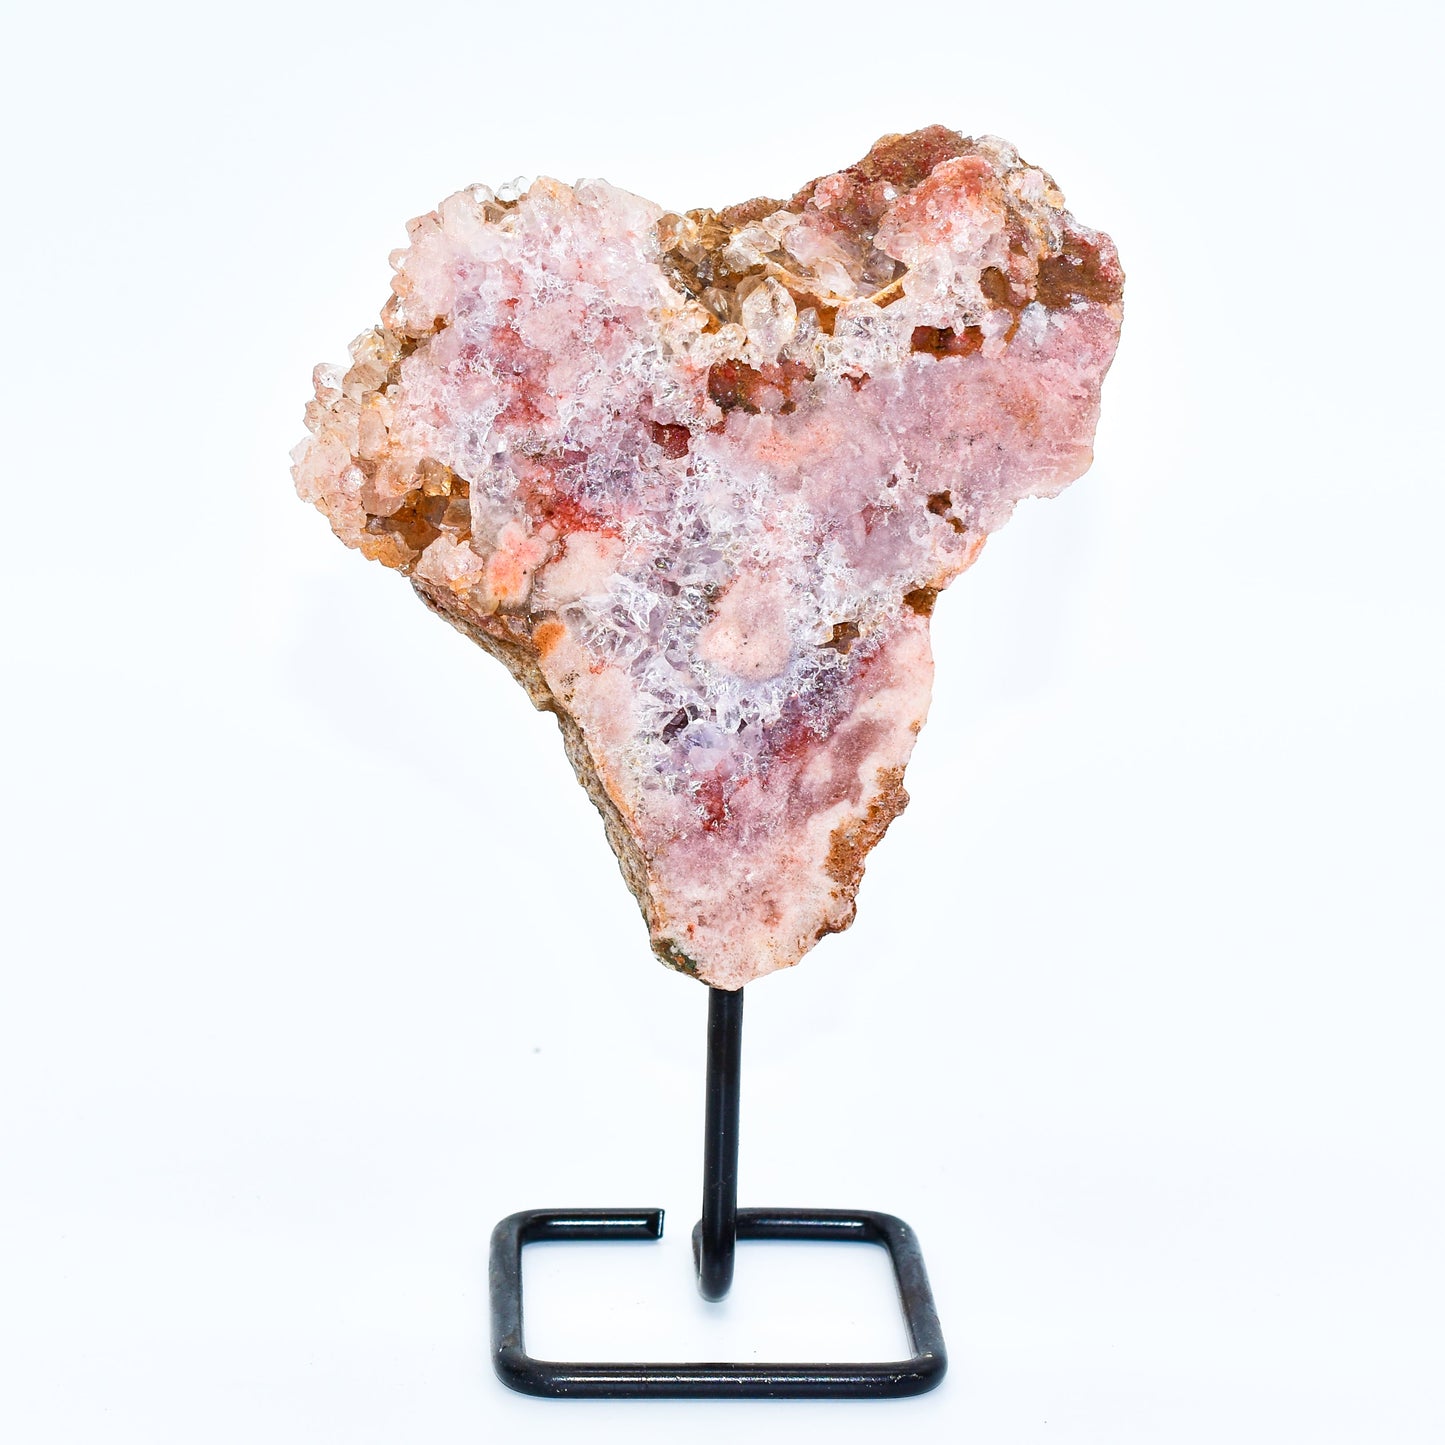 Small Pink Amethyst Slabs on Display Stands